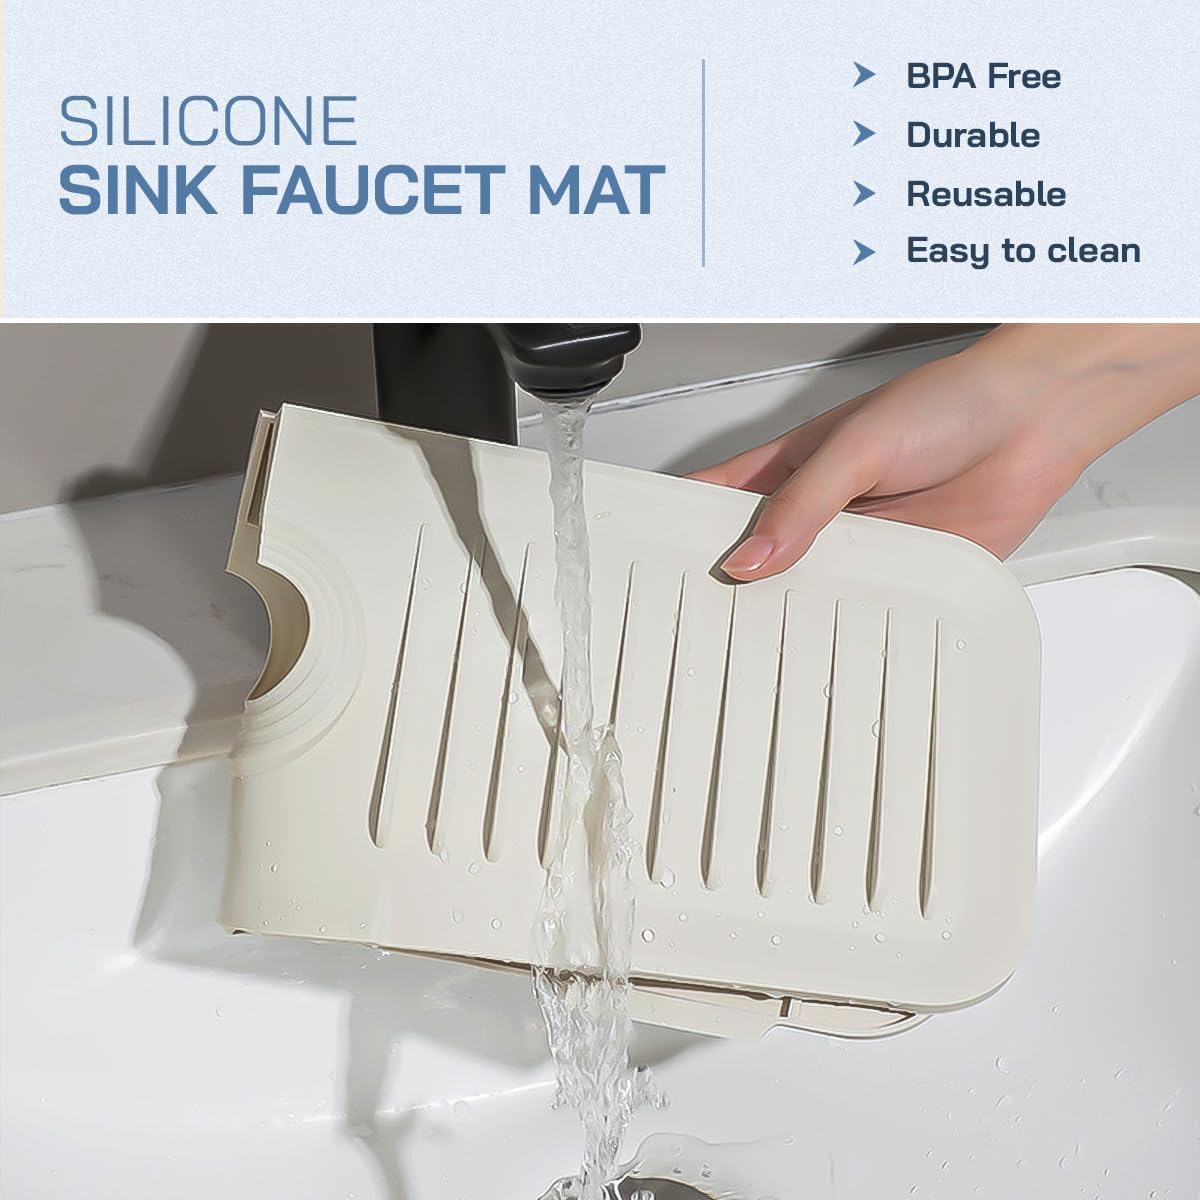 Lux Household Silicone Faucet Handle Drip Catcher Tray - Self-Draining Kitchen Sink Splash Guard with Adjustable Coil Opening - Sink Faucet Mat with Cleaning Towel (Ivory)